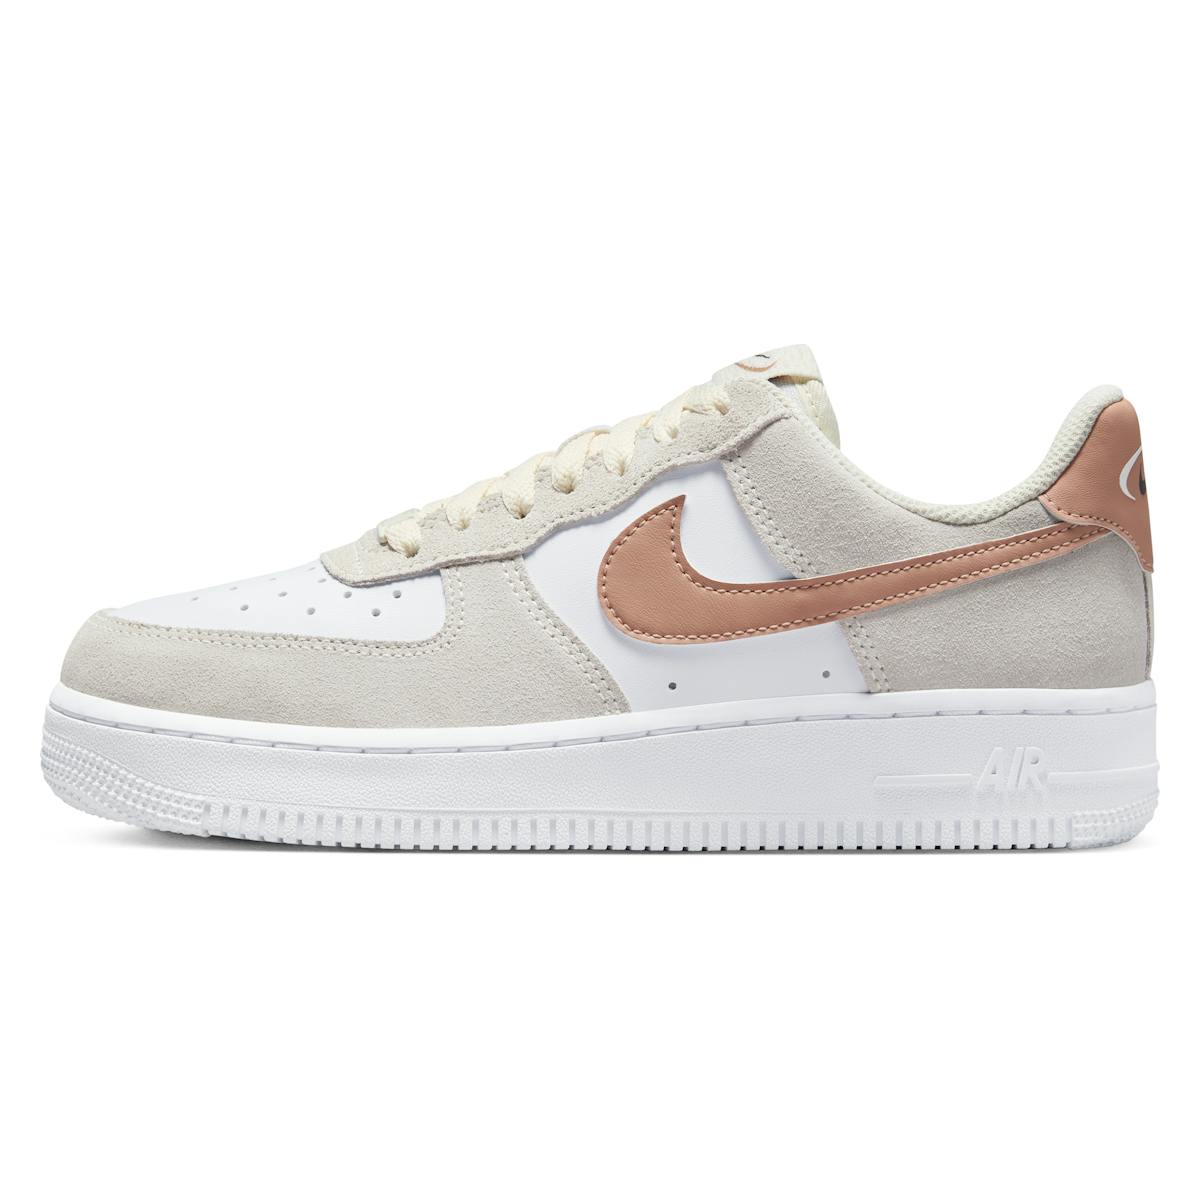 Nike Air Force 1 '07 "Dusted Clay"